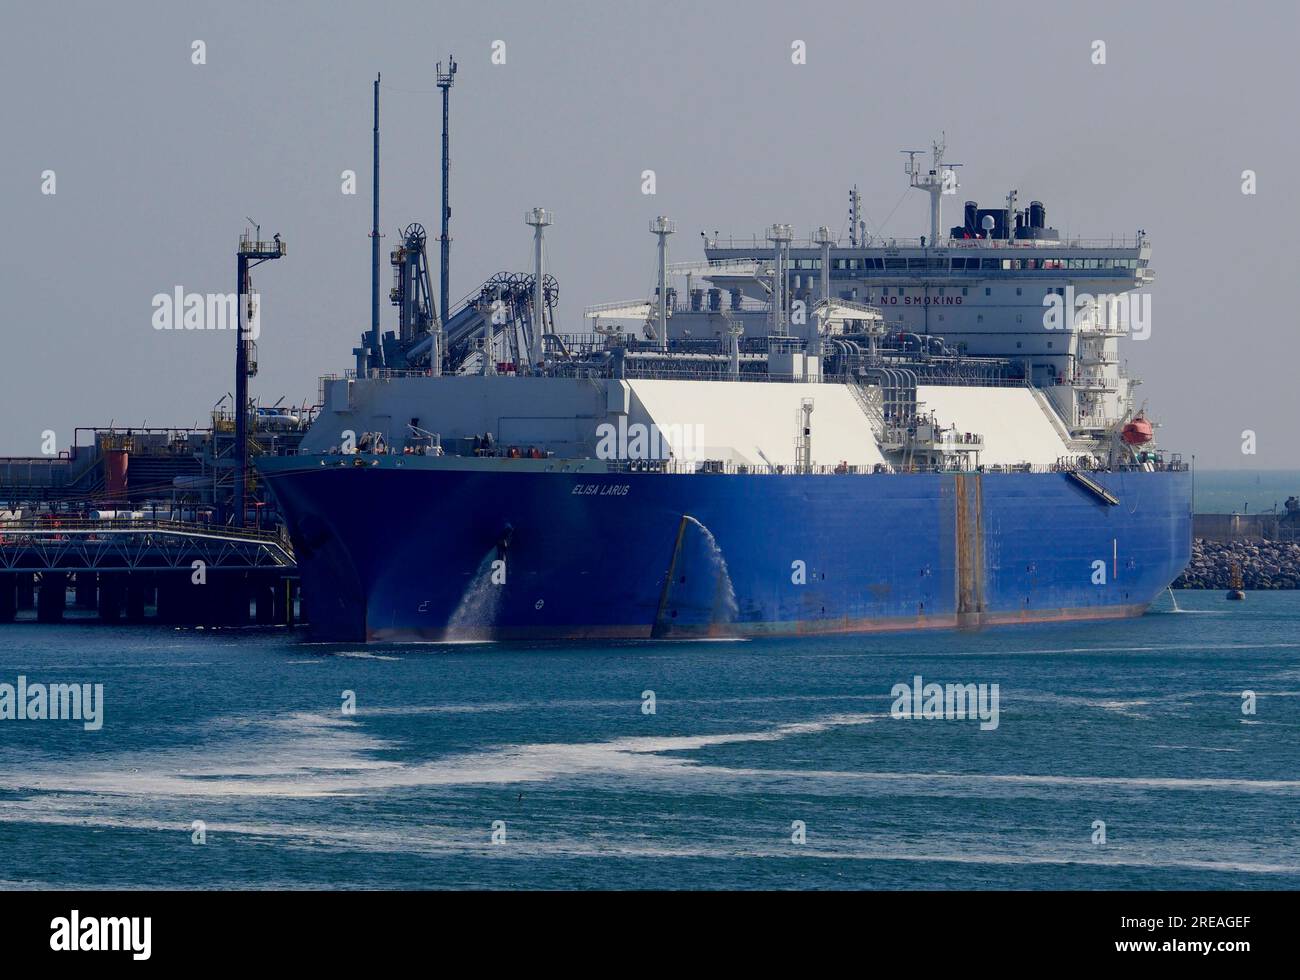 AJAXNETPHOTO. 3RD MAY, 2023. DUNKERQUE, FRANCE. - LNG CARRIER IN PORT - THE LIQUID NATURAL GAS CARRIER ELISA LARUS MOORED AT THE DISCHARGE TERMINAL. PHOTO:JONATHAN EASTLAND/AJAX REF:M1X 230805 5030149 Stock Photo